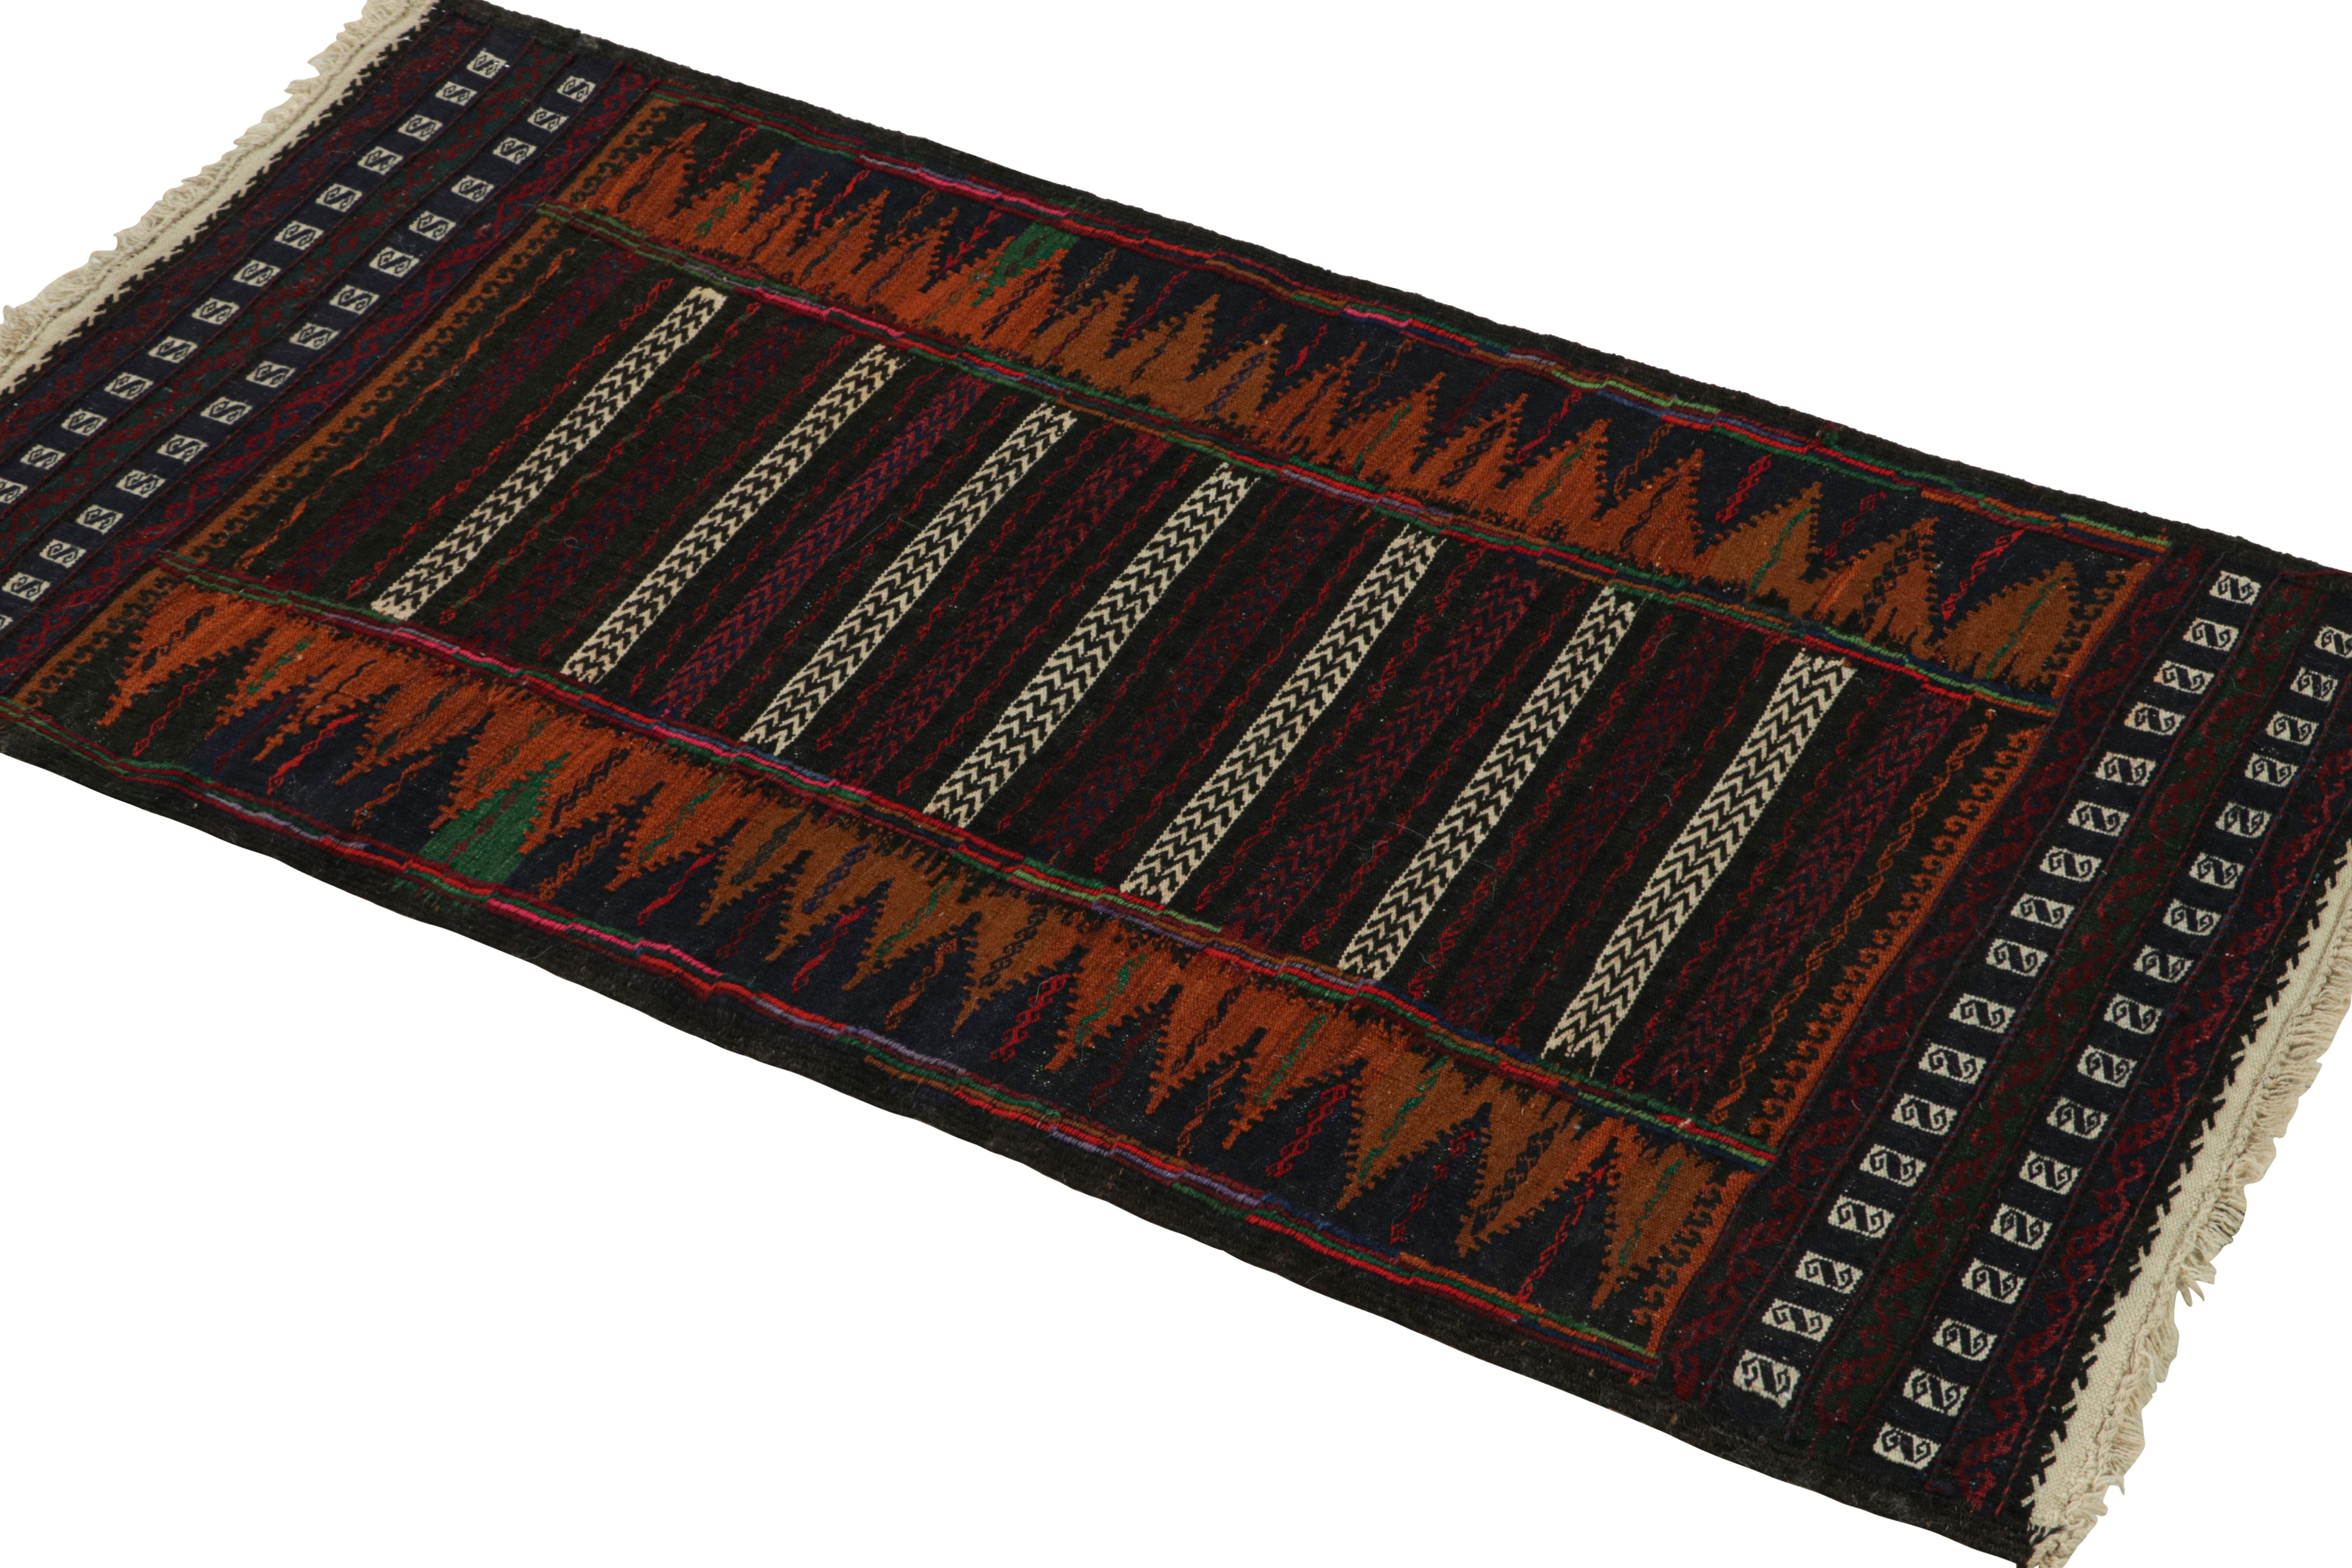 Handwoven in wool, this 2x4 vintage Afghan kilim rug originates circa 1950-1960—a tribal curation among new additions to the Rug & Kilim collection.

On the Design:

A polychromatic colorway with both rich and vibrant hues underscores both stripes